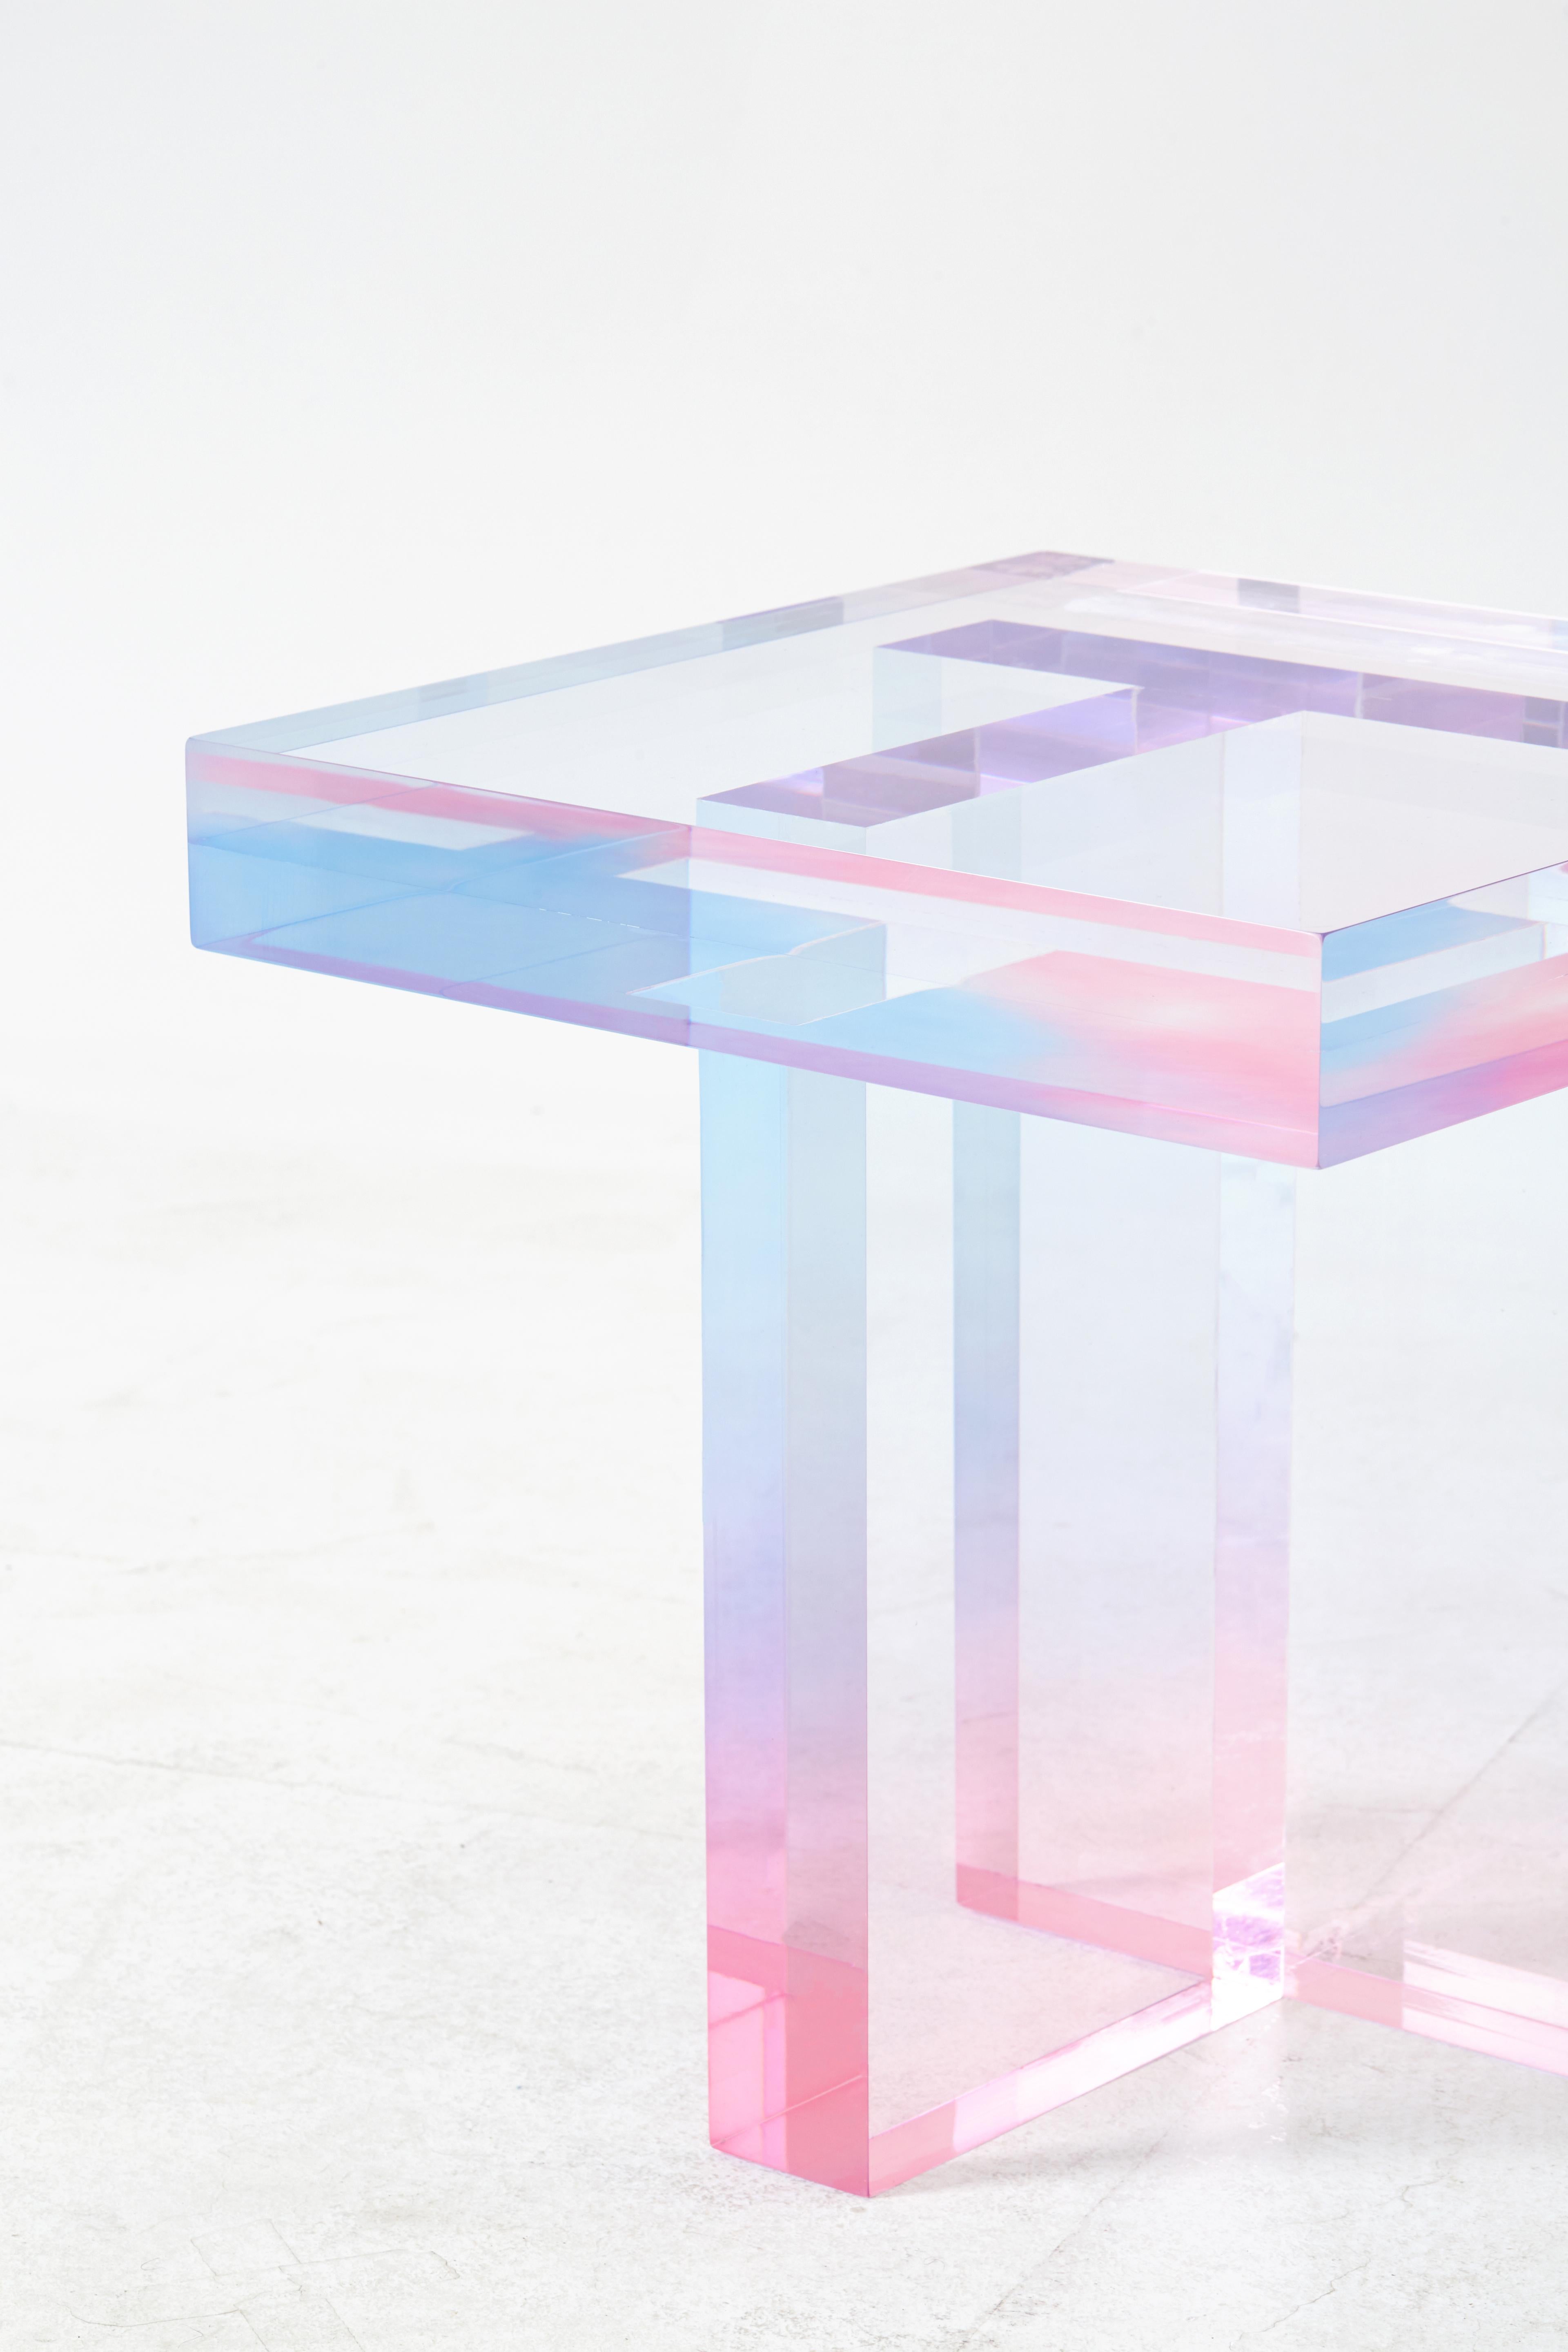 Other Crystal Series_ Table 02 For Sale